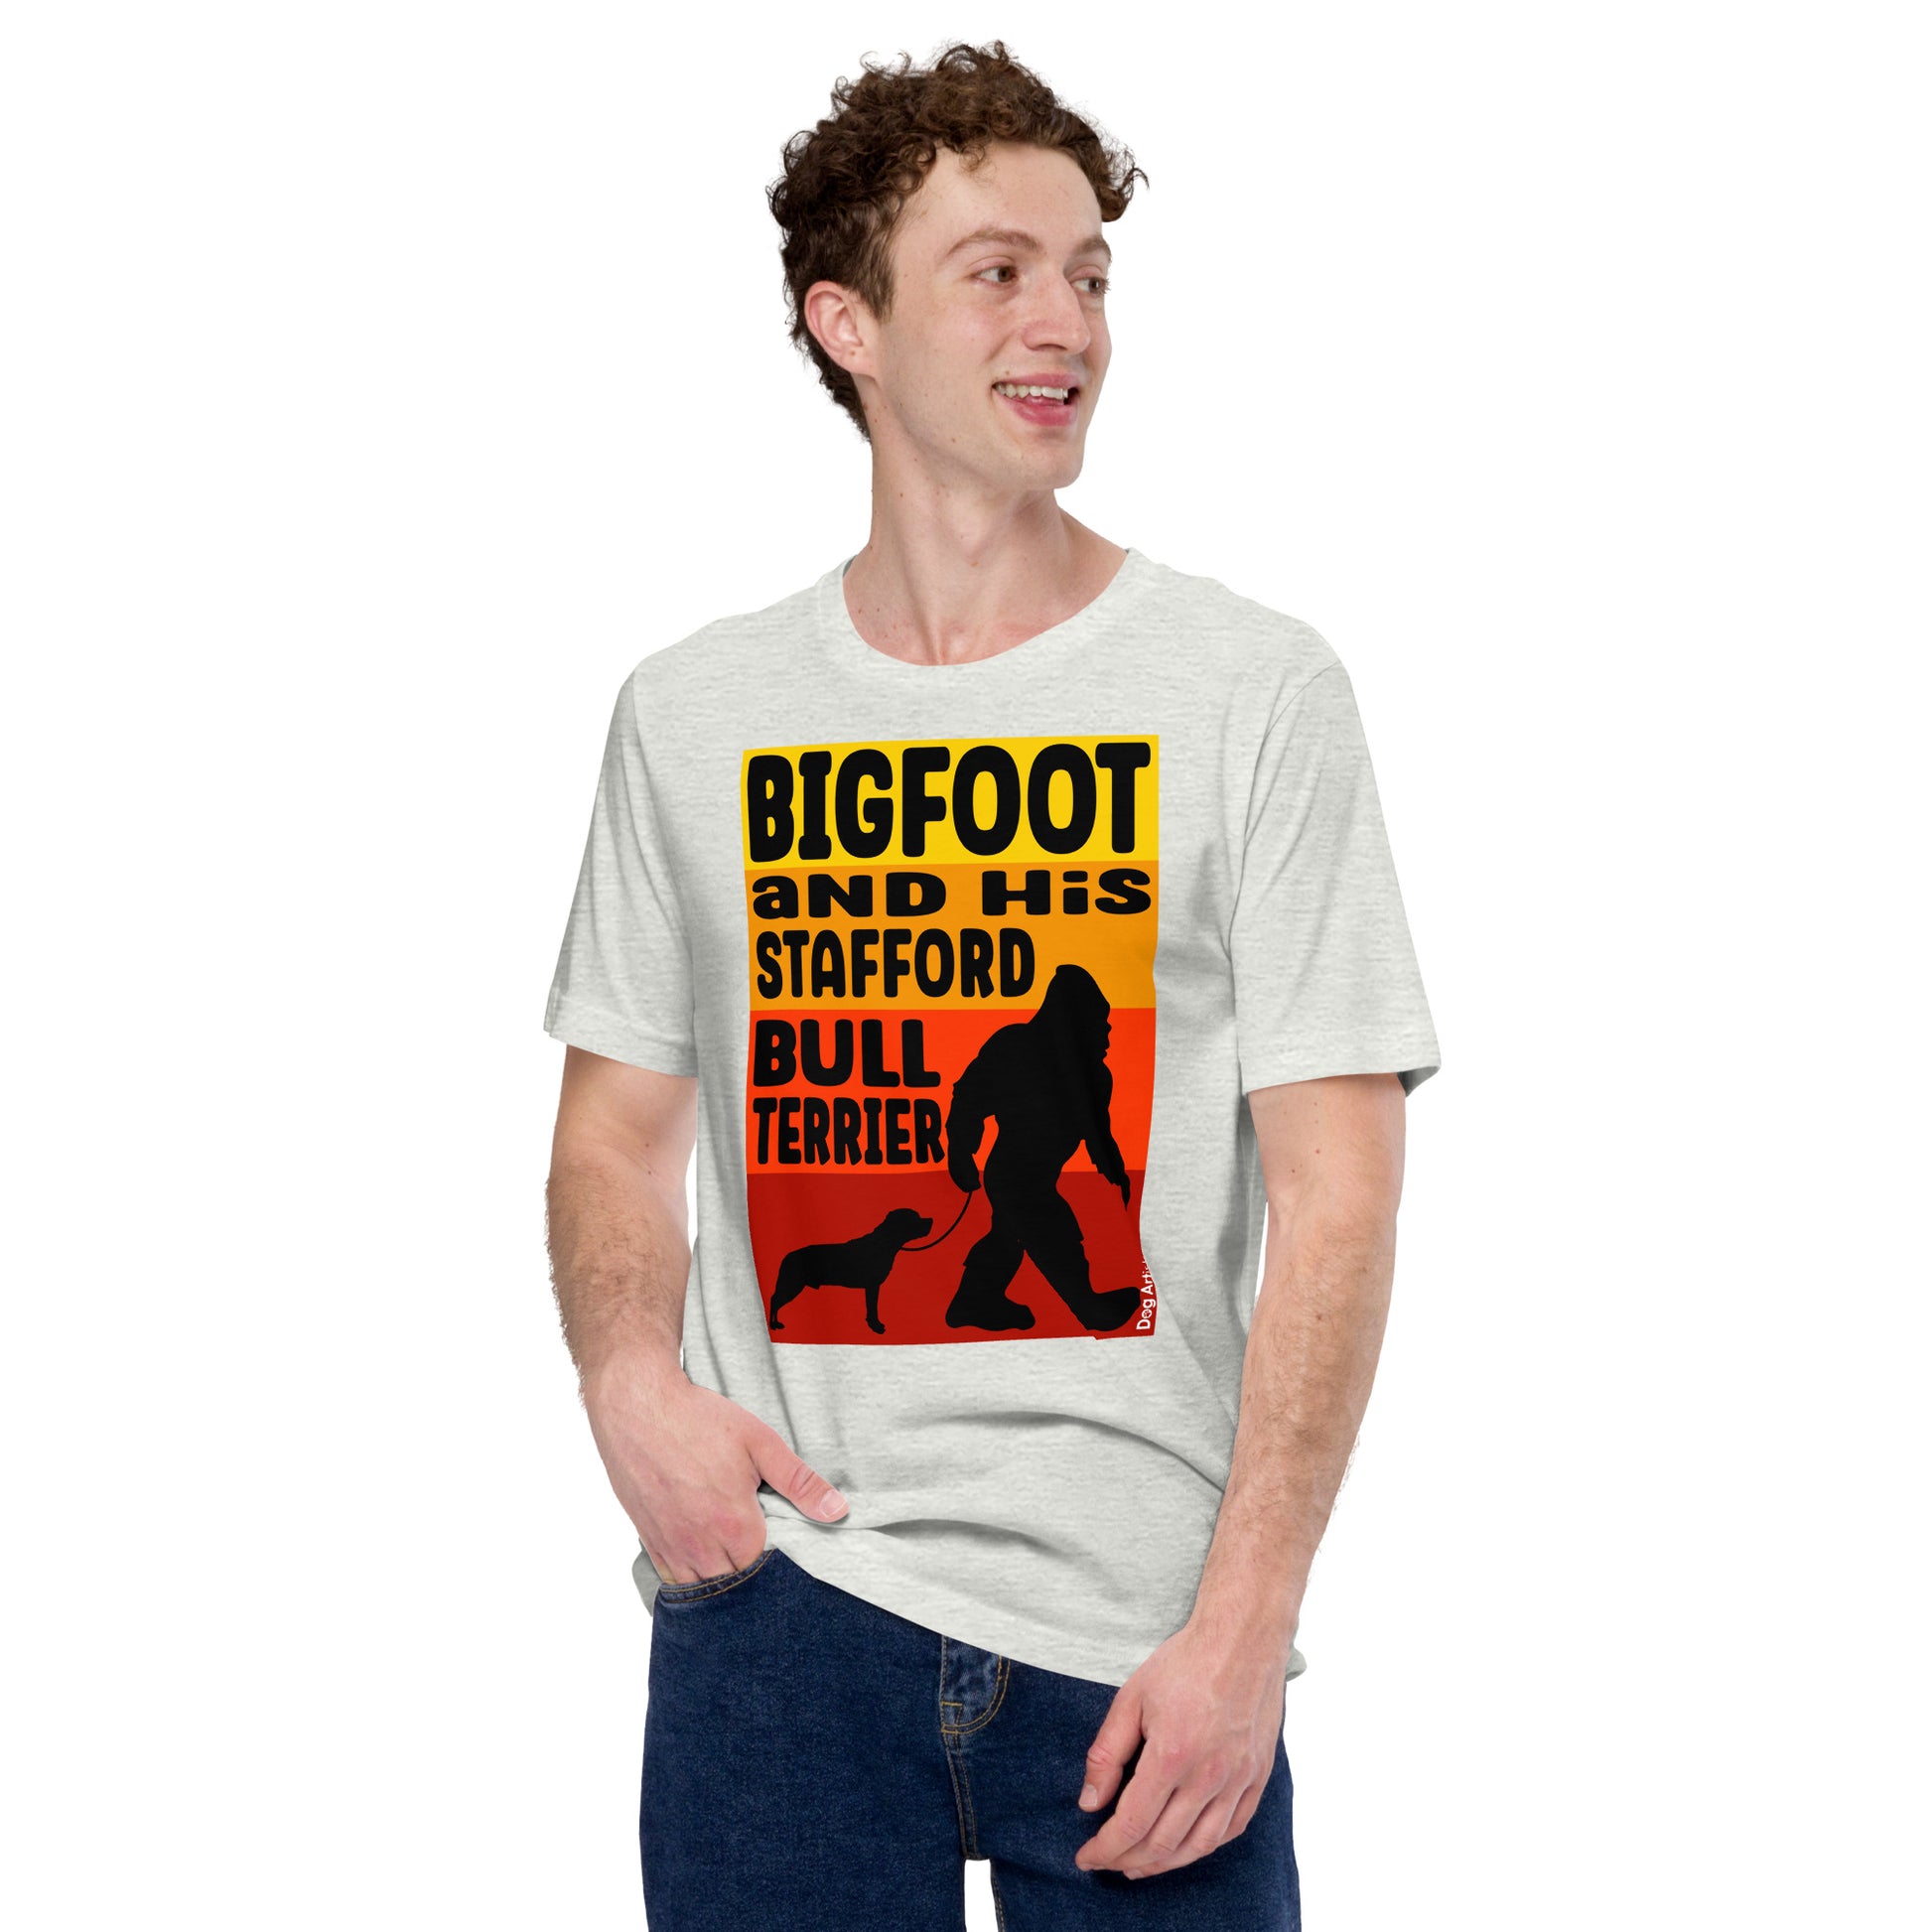 Bigfoot and his Staffordshire Bull Terrier unisex ash t-shirt by Dog Artistry.